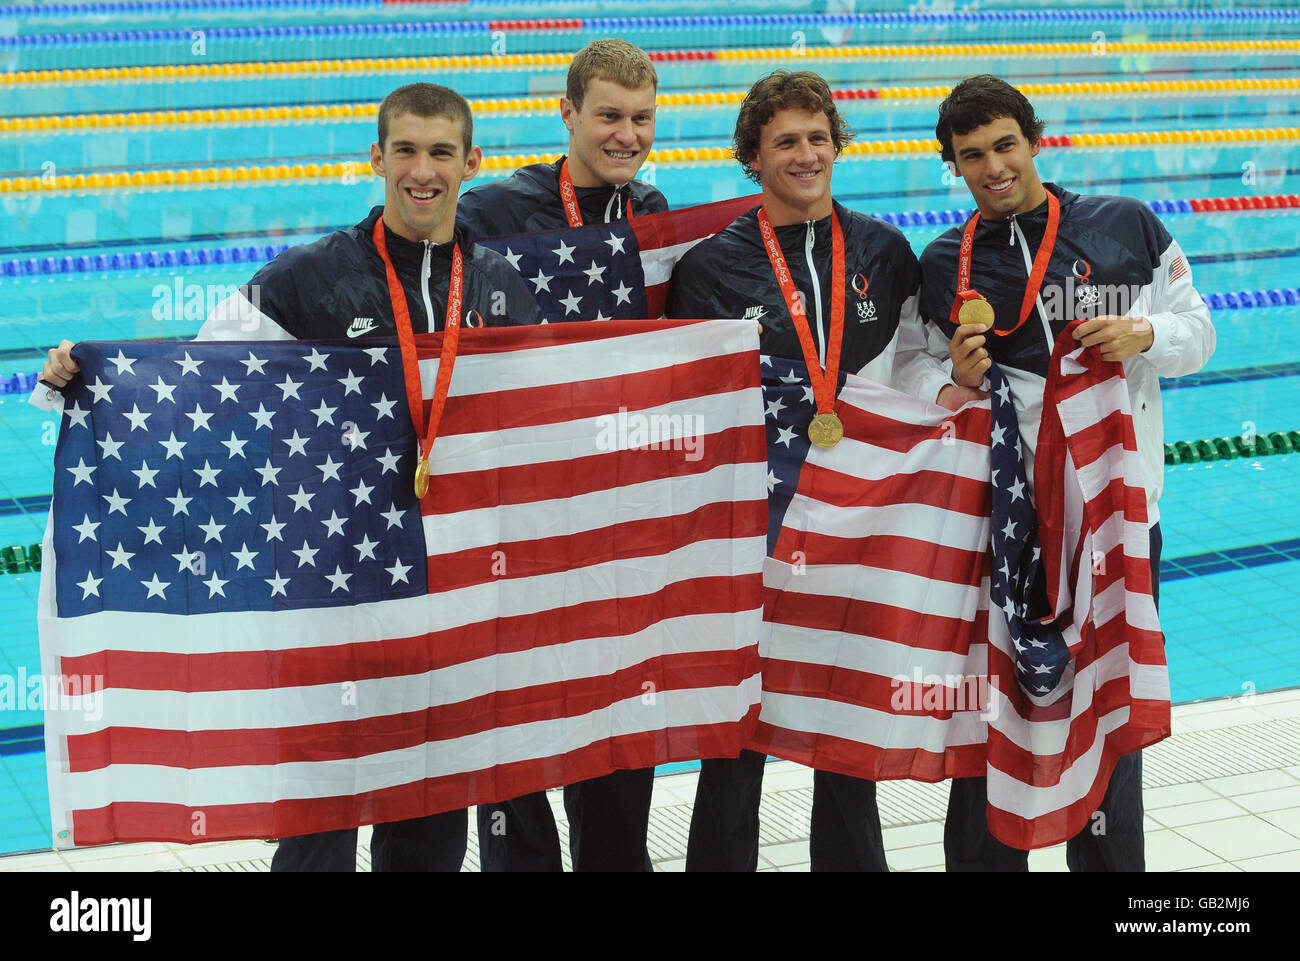 USA's 4x200m freestyle relay team of (left to right) Michael Phelps, Peter Vanderkaay, Ryan Lochte and Ricky Berens celebrate with their gold medal's at the Beijing National Aquatic Center during the 2008 Beijing Olympic Games in China. Stock Photo